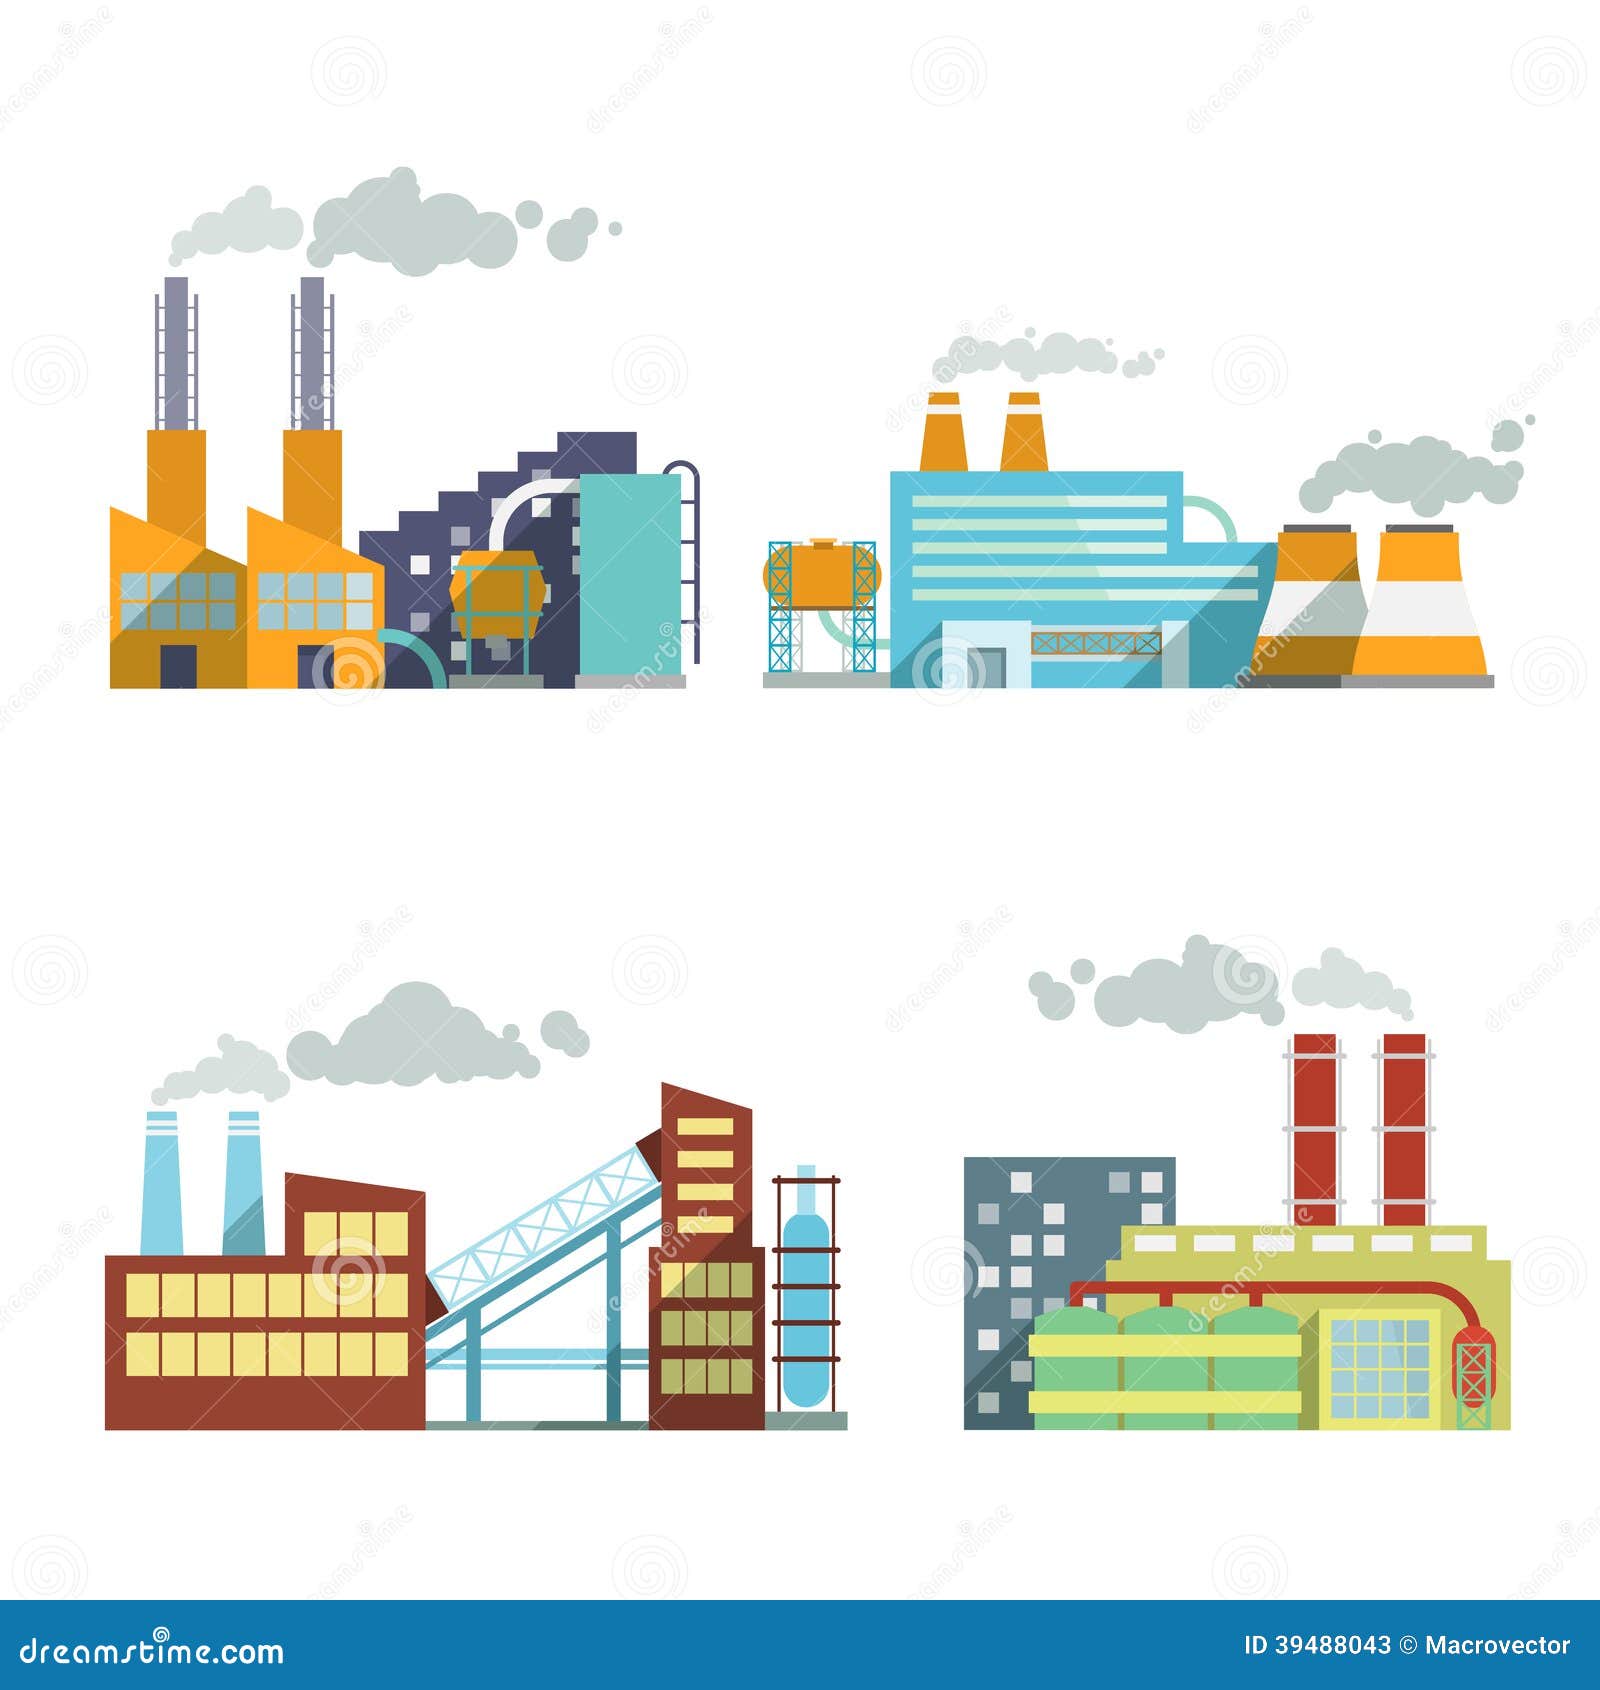 industrial technology clipart - photo #27